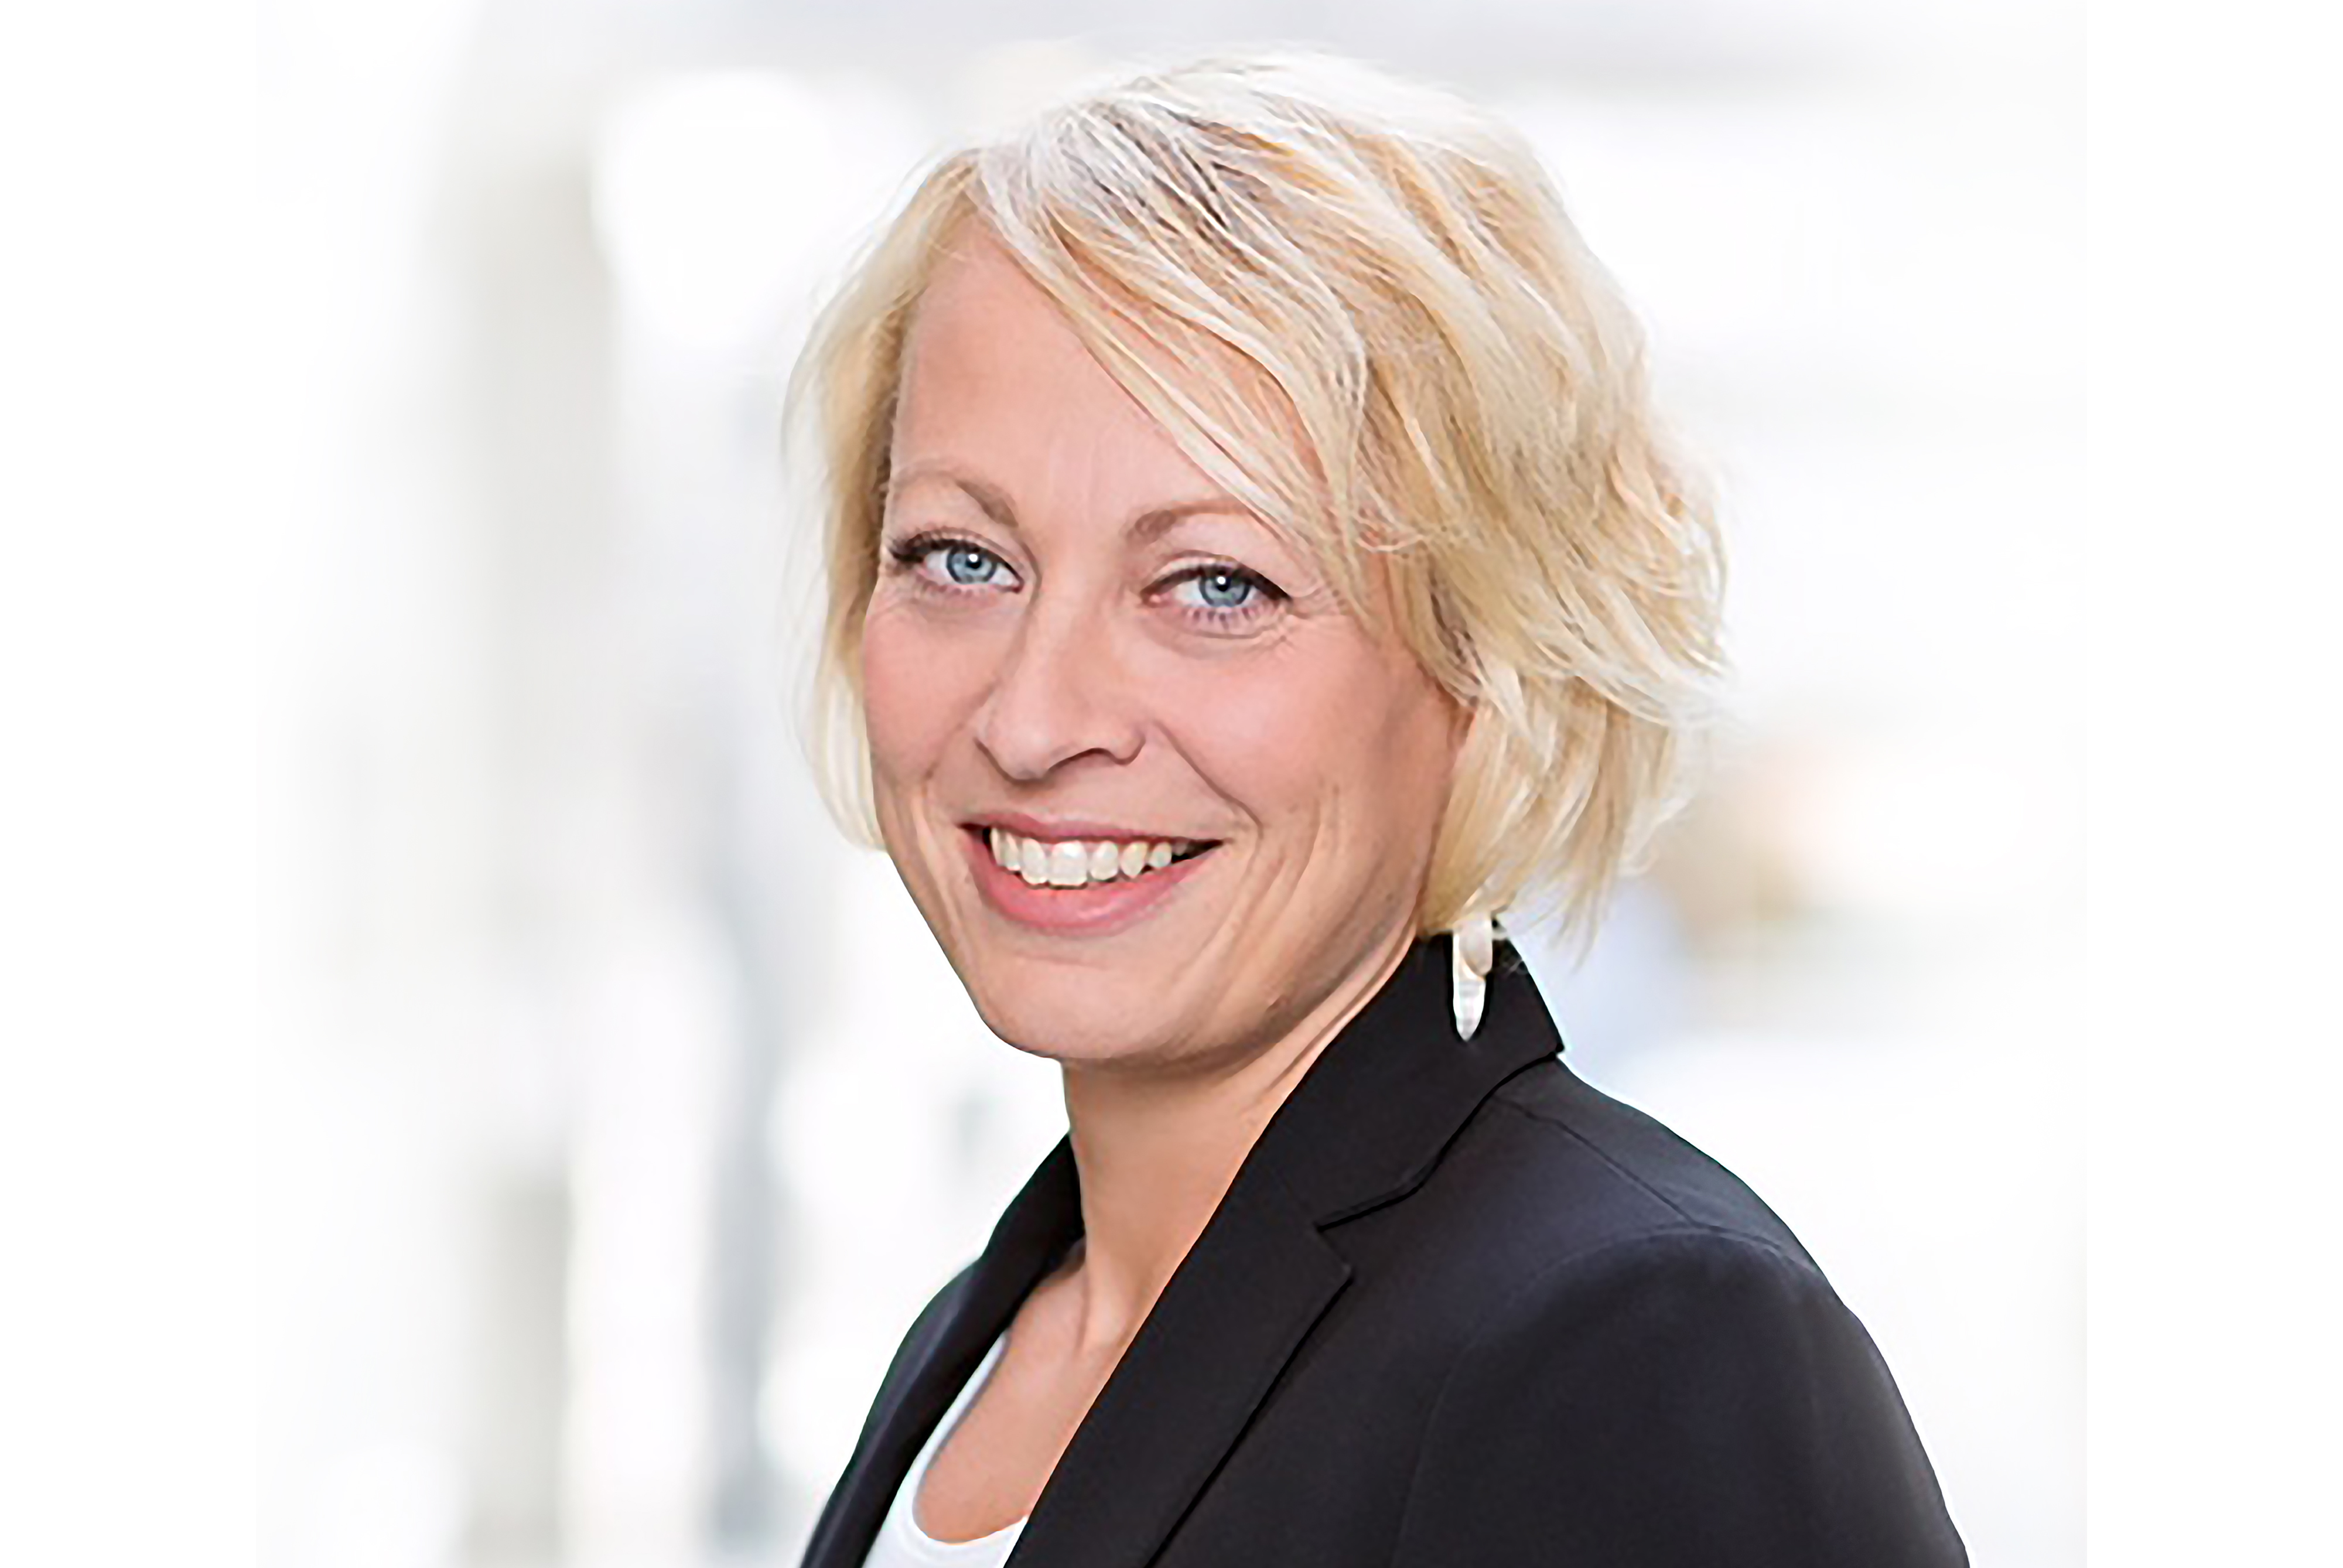 Hanna Ståhl appointed Managing Director of University Services